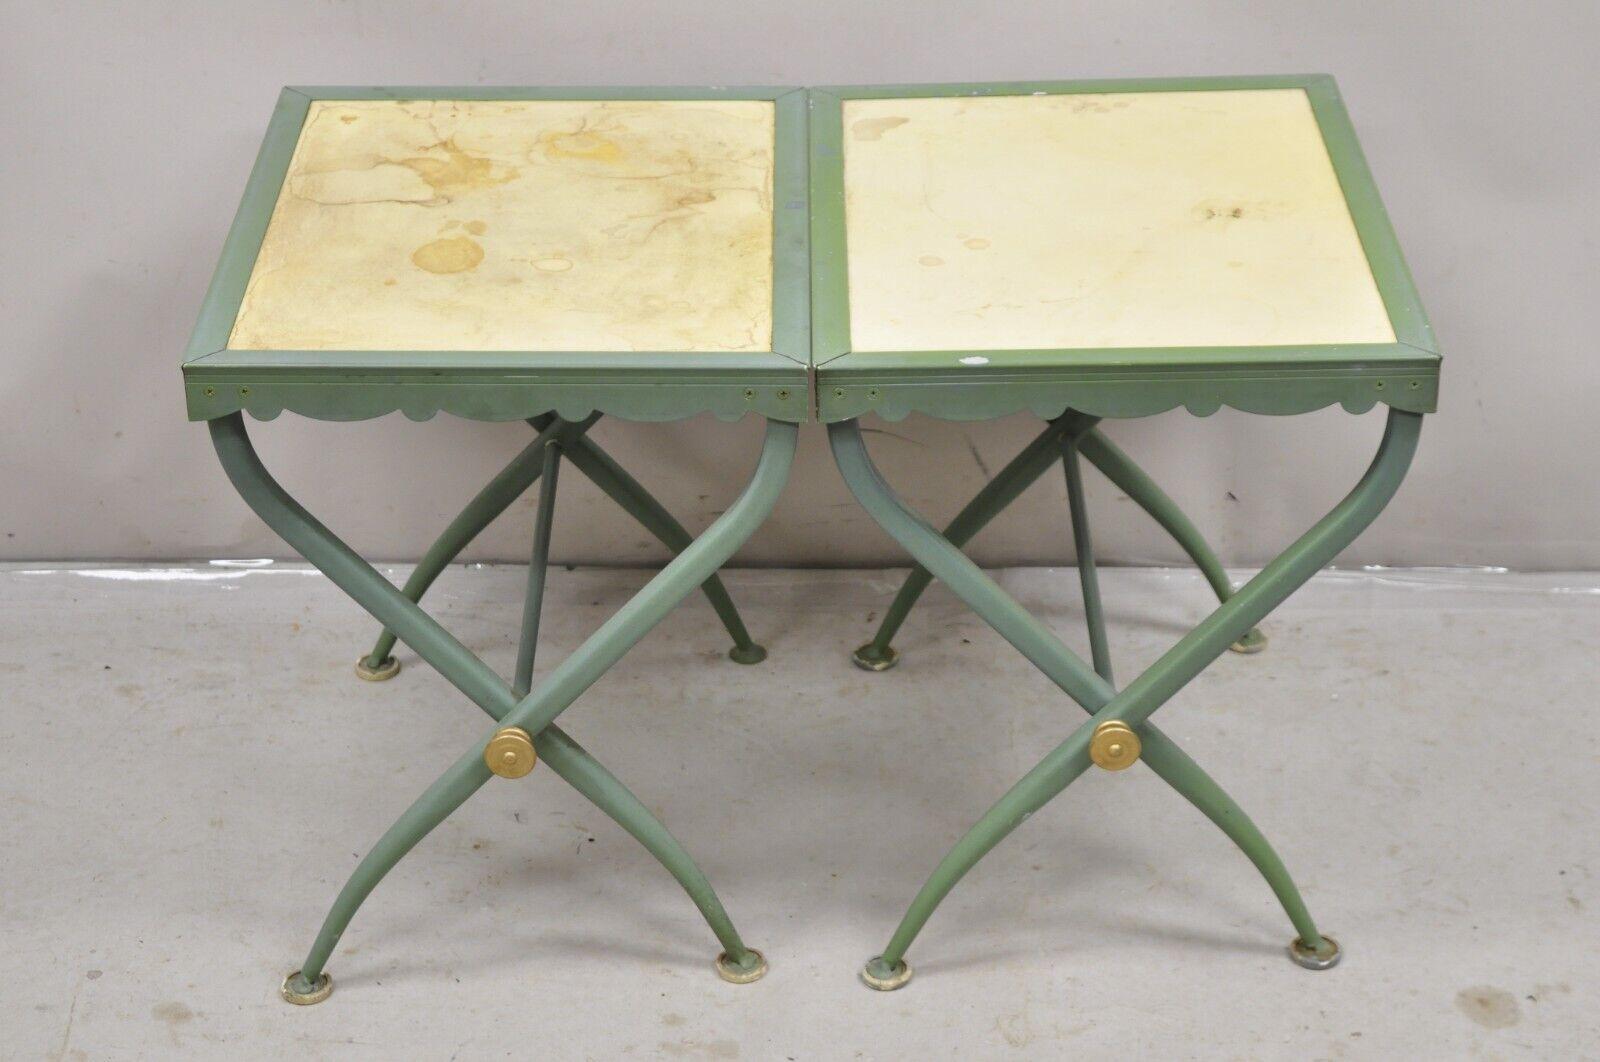 Troy Sunshade Hollywood Regency Curule X-Frame Aluminum Patio Side Tables - Pair In Good Condition For Sale In Philadelphia, PA